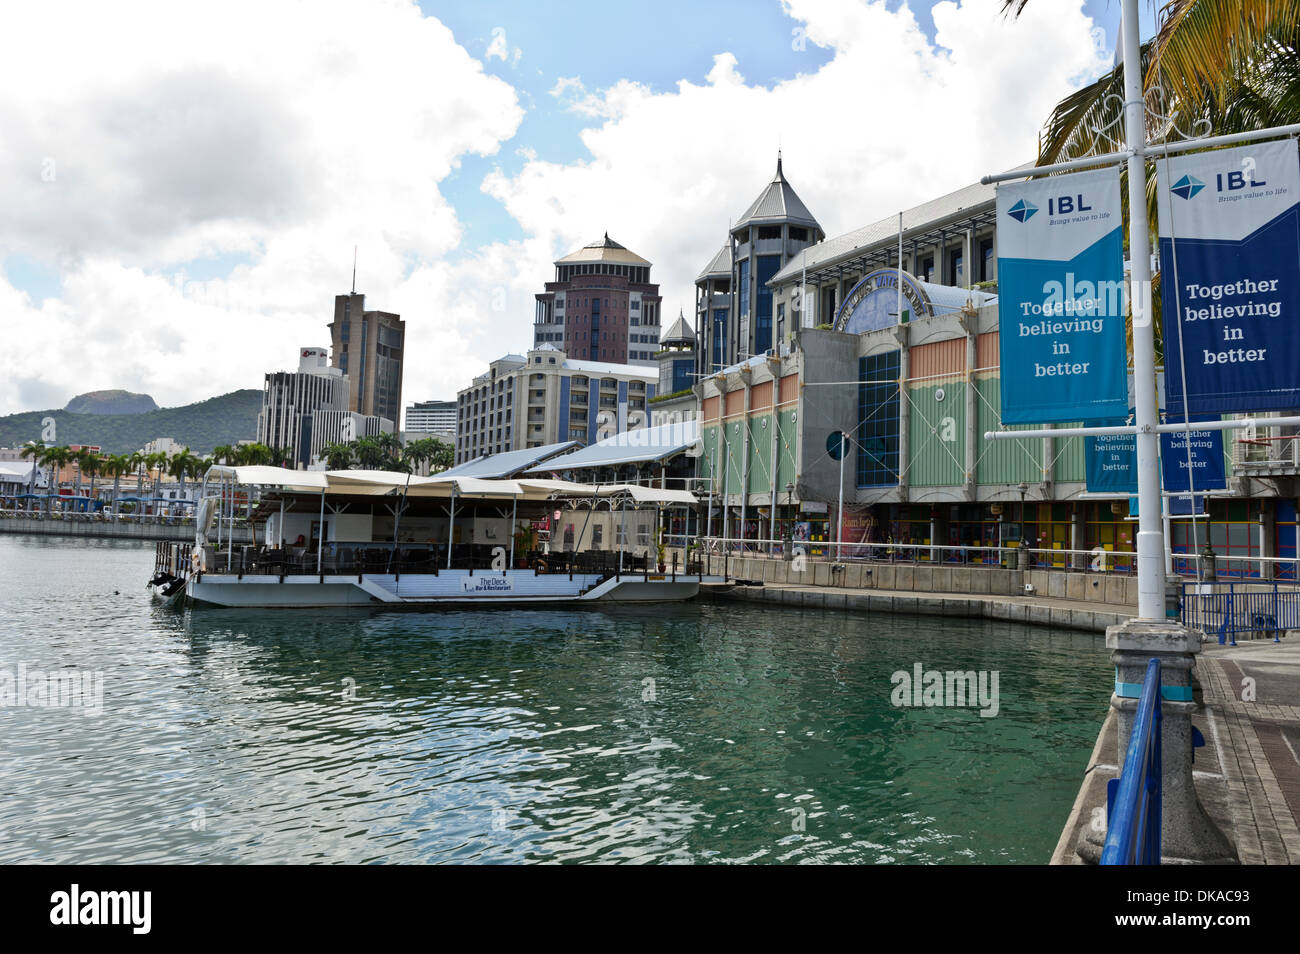 Caudan Waterfront with restaurants, bars and floating seafood restaurant, Port Louis, Mauritius. Stock Photo